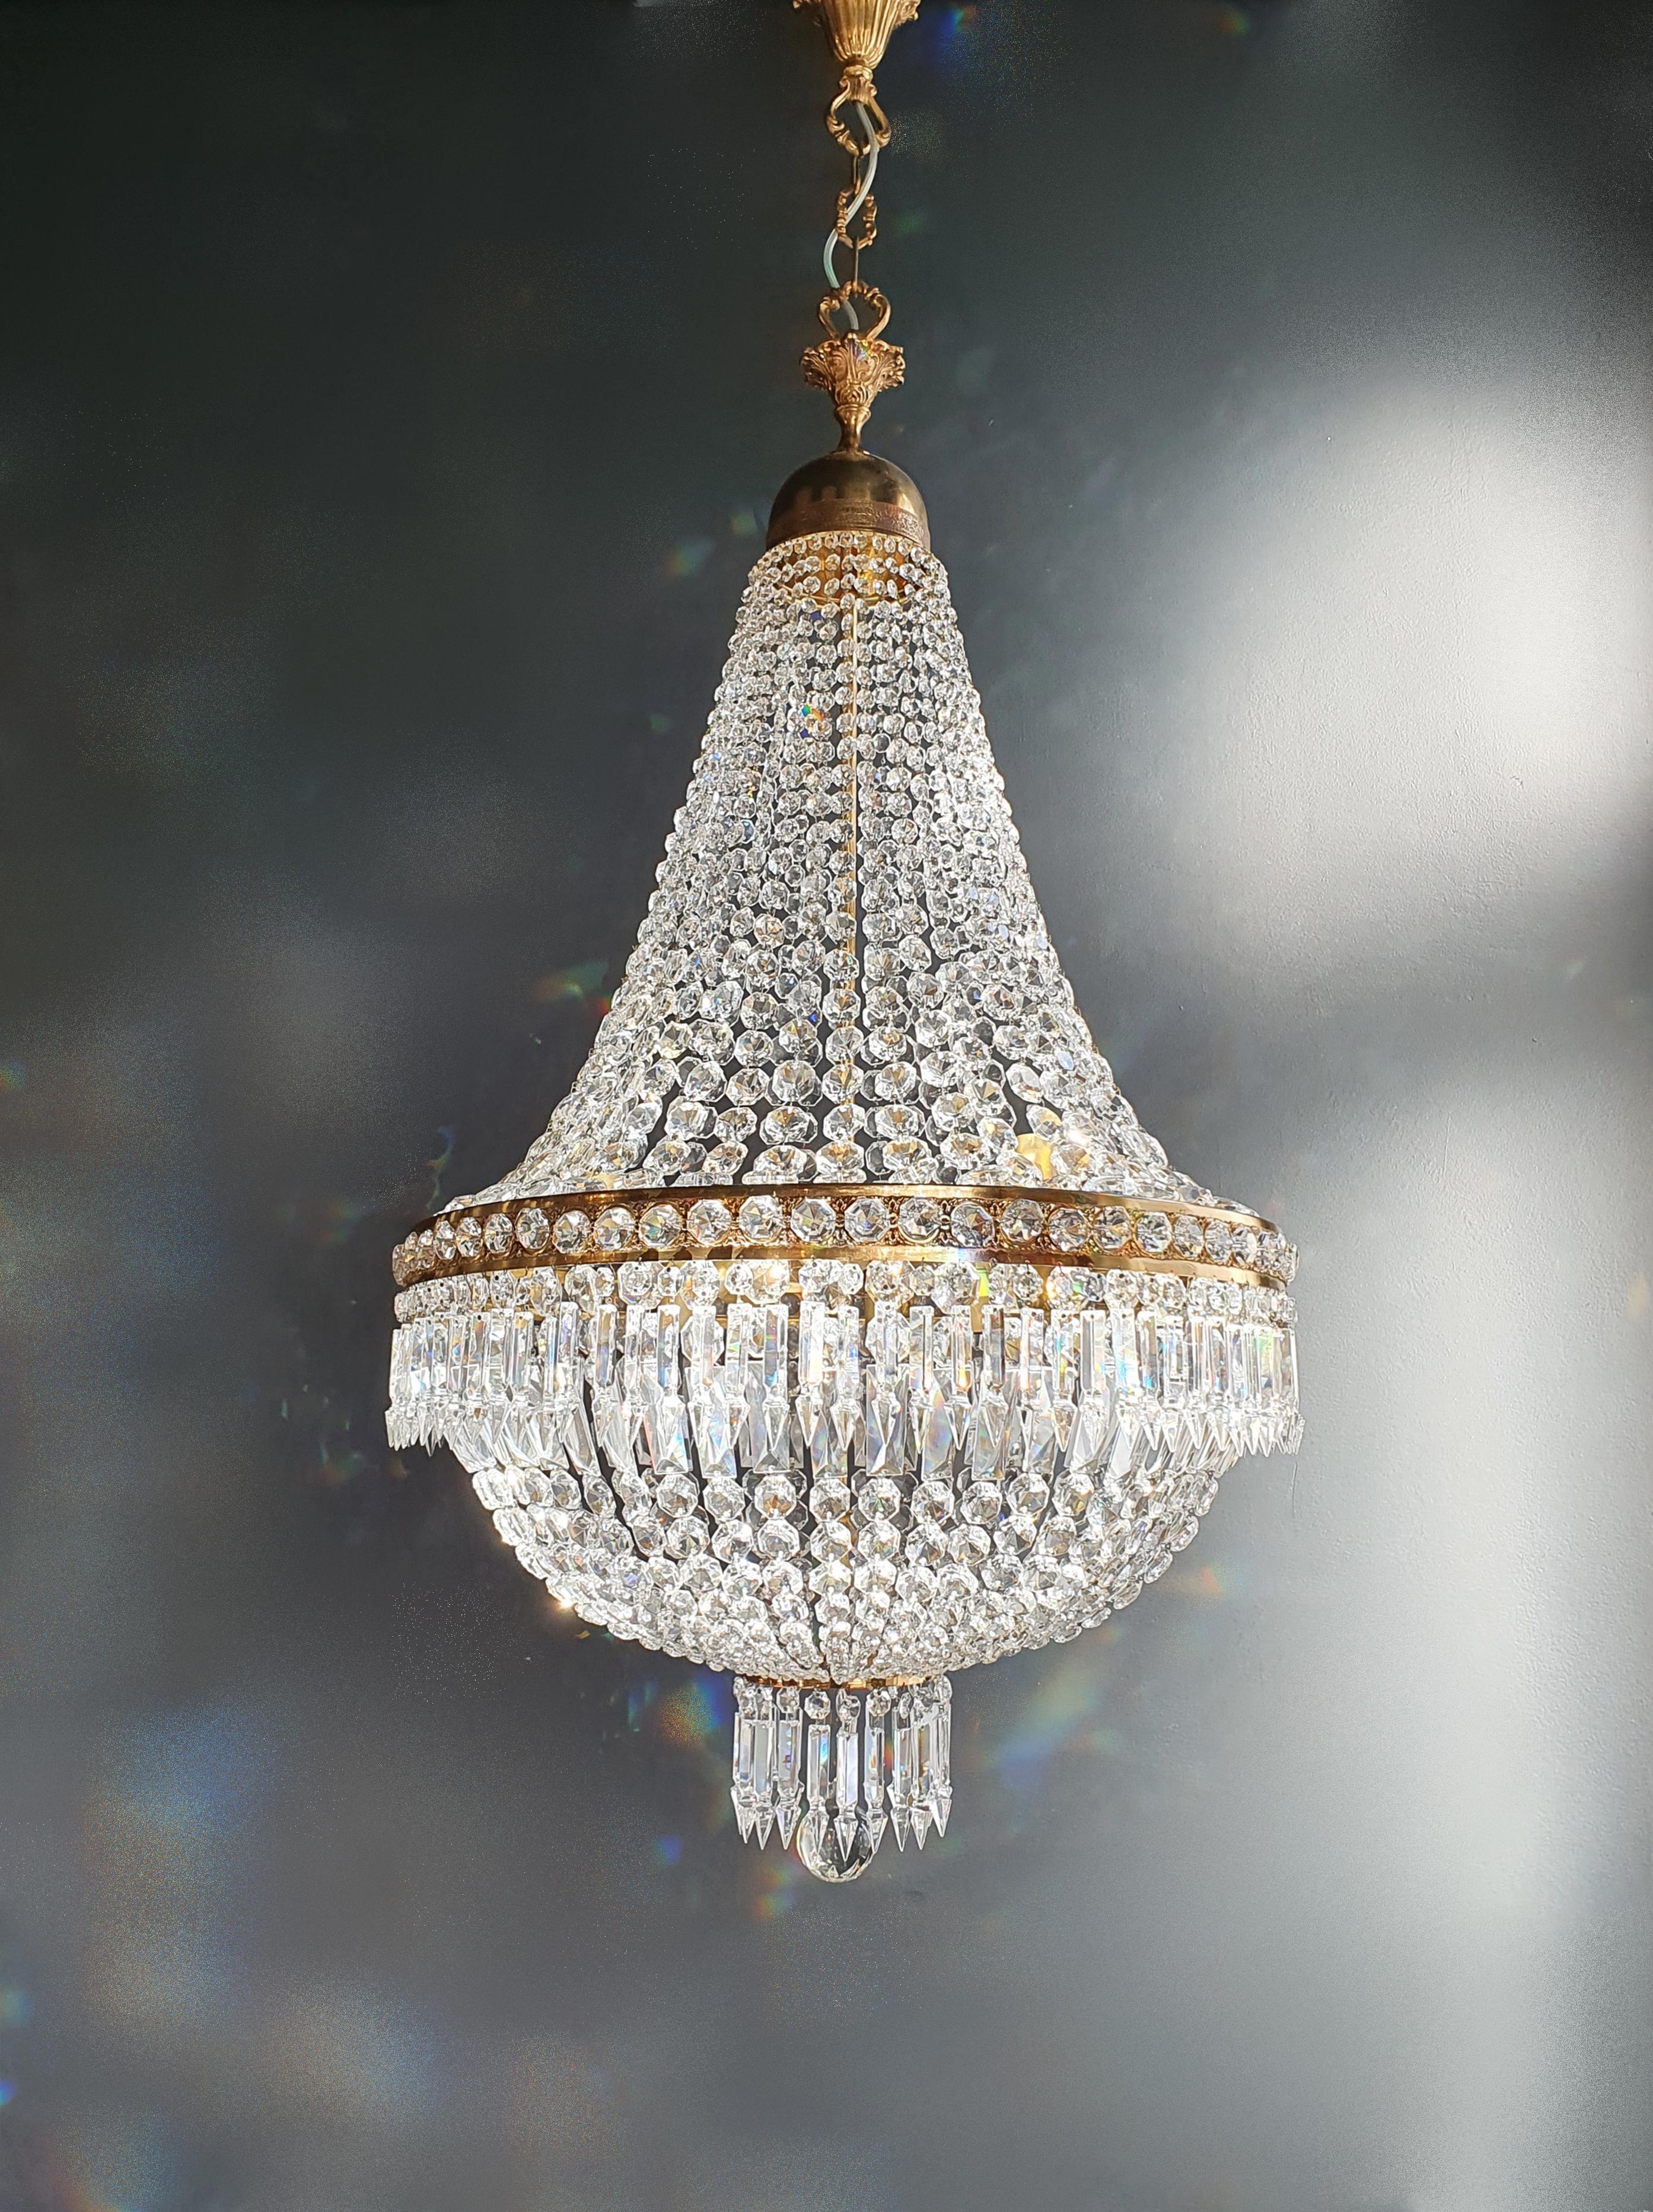 Cabling and sockets completely renewed. Crystal hand knotted
Measures: Total height 140 cm, height without chain 115 cm, diameter 61 cm, weight (approximately) 18 kg.

Number of lights: 12-light bulb sockets: E14


Montgolfiè Empire brass sac